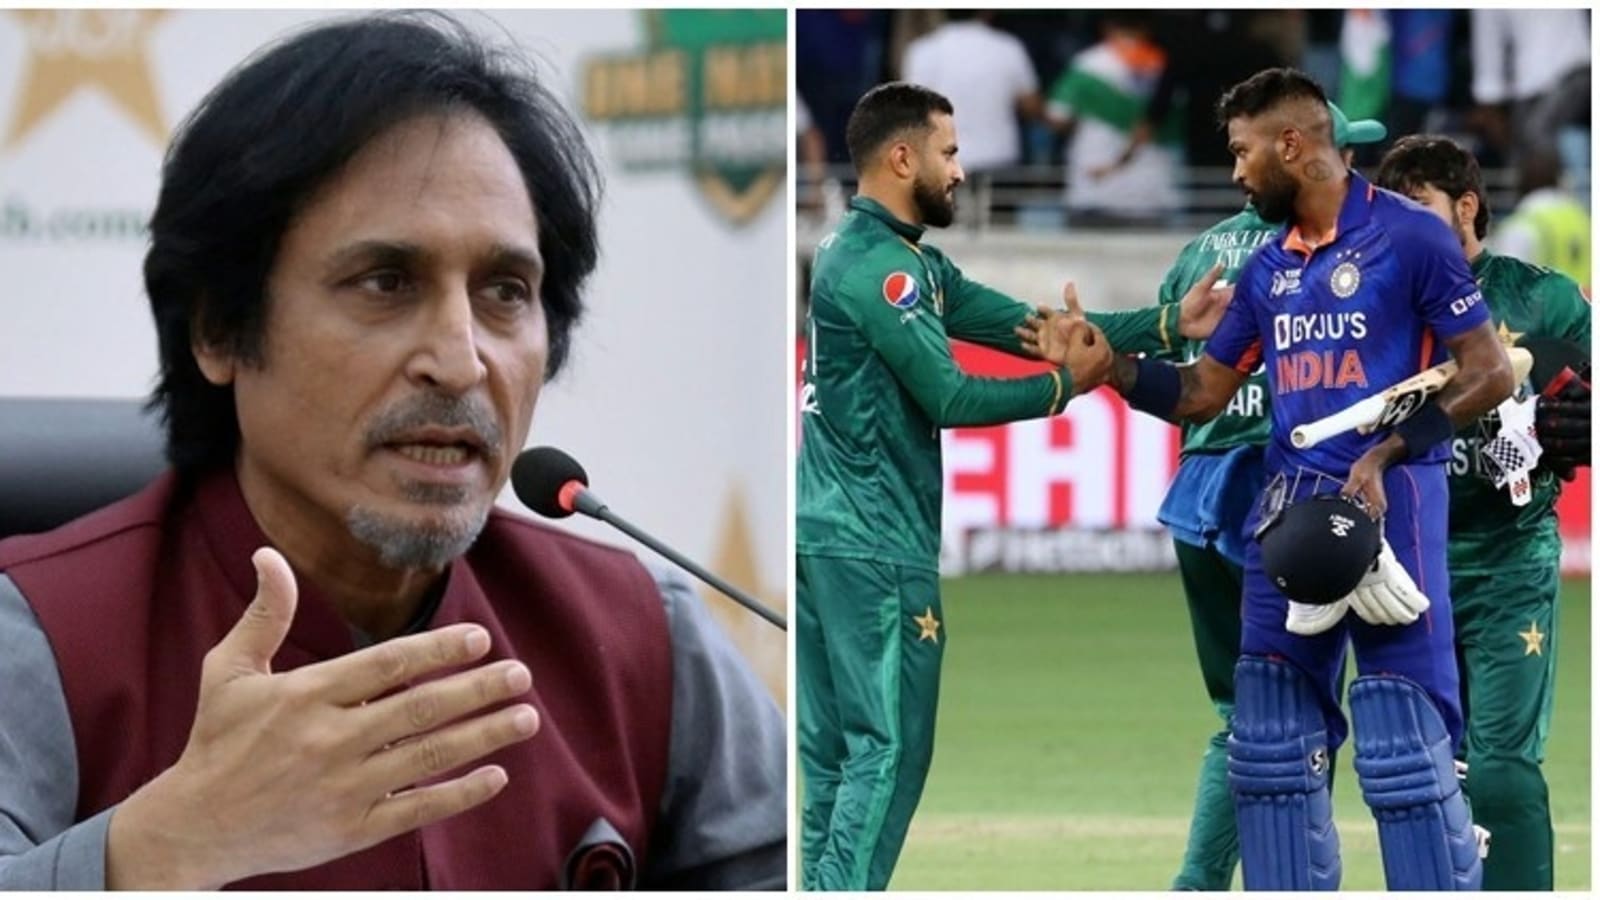 ramiz-raja-s-old-pakistan-cricket-can-collapse-without-india-support-video-goes-viral-amid-asia-cup-venue-controversy